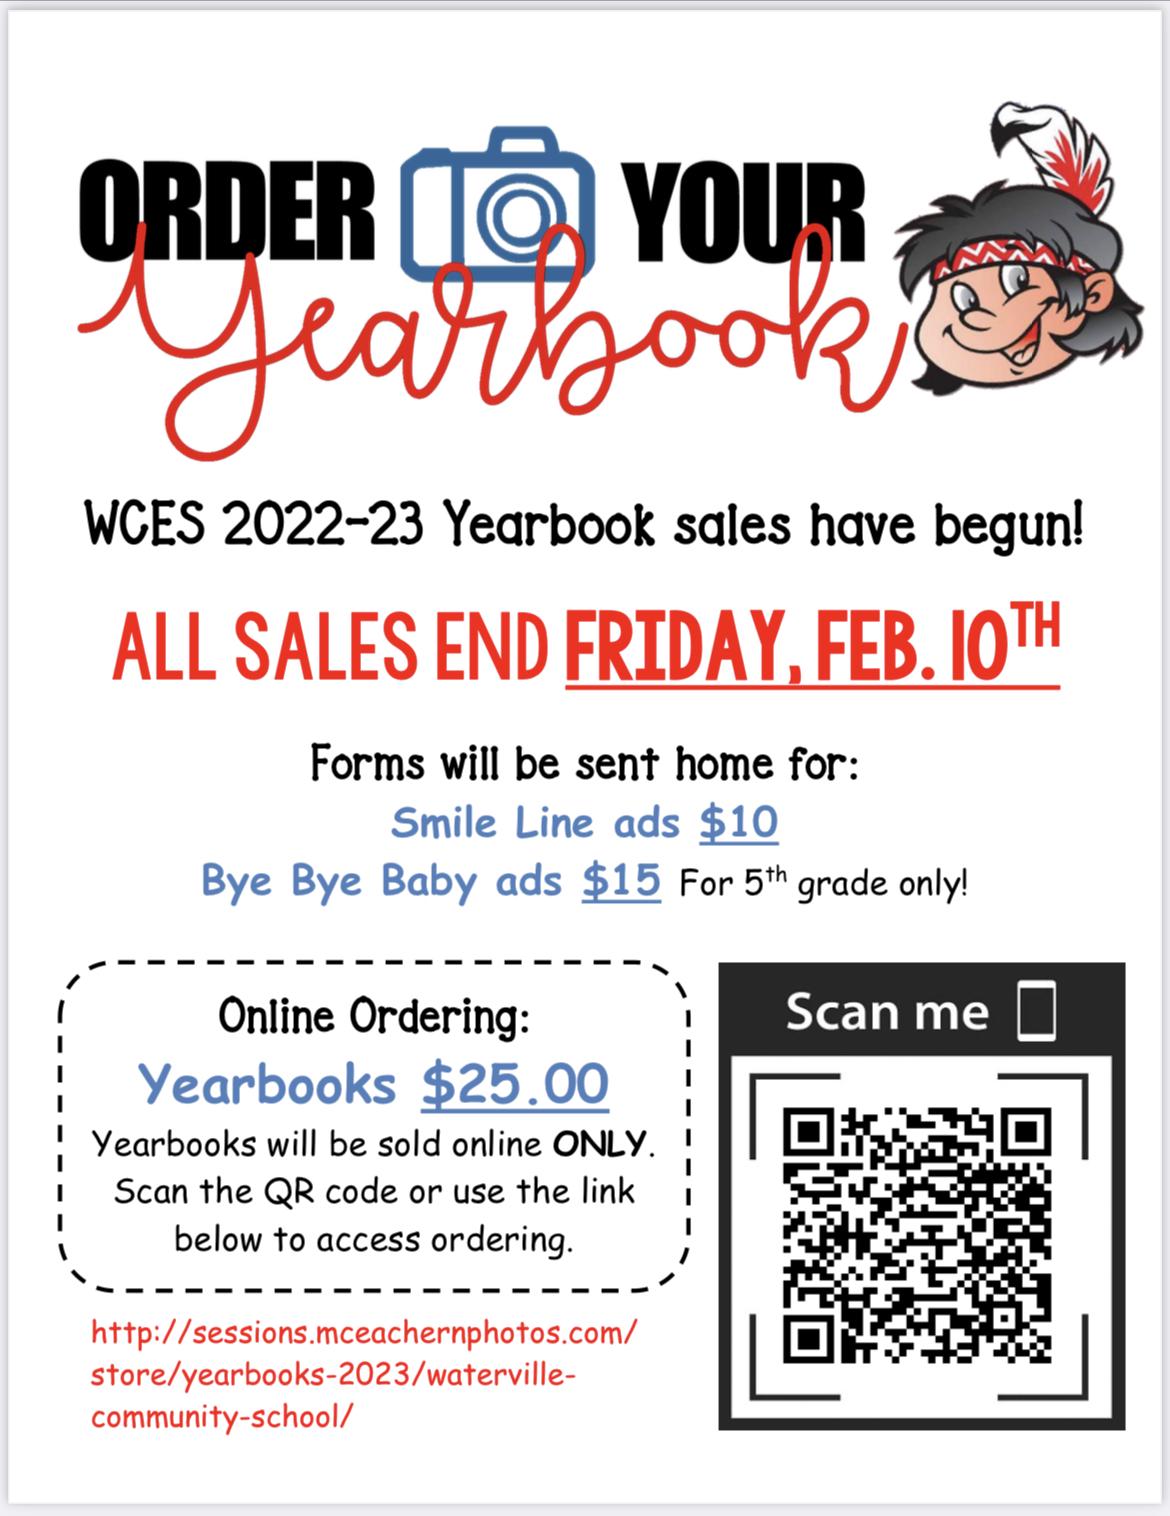 Yearbook order information and QR code